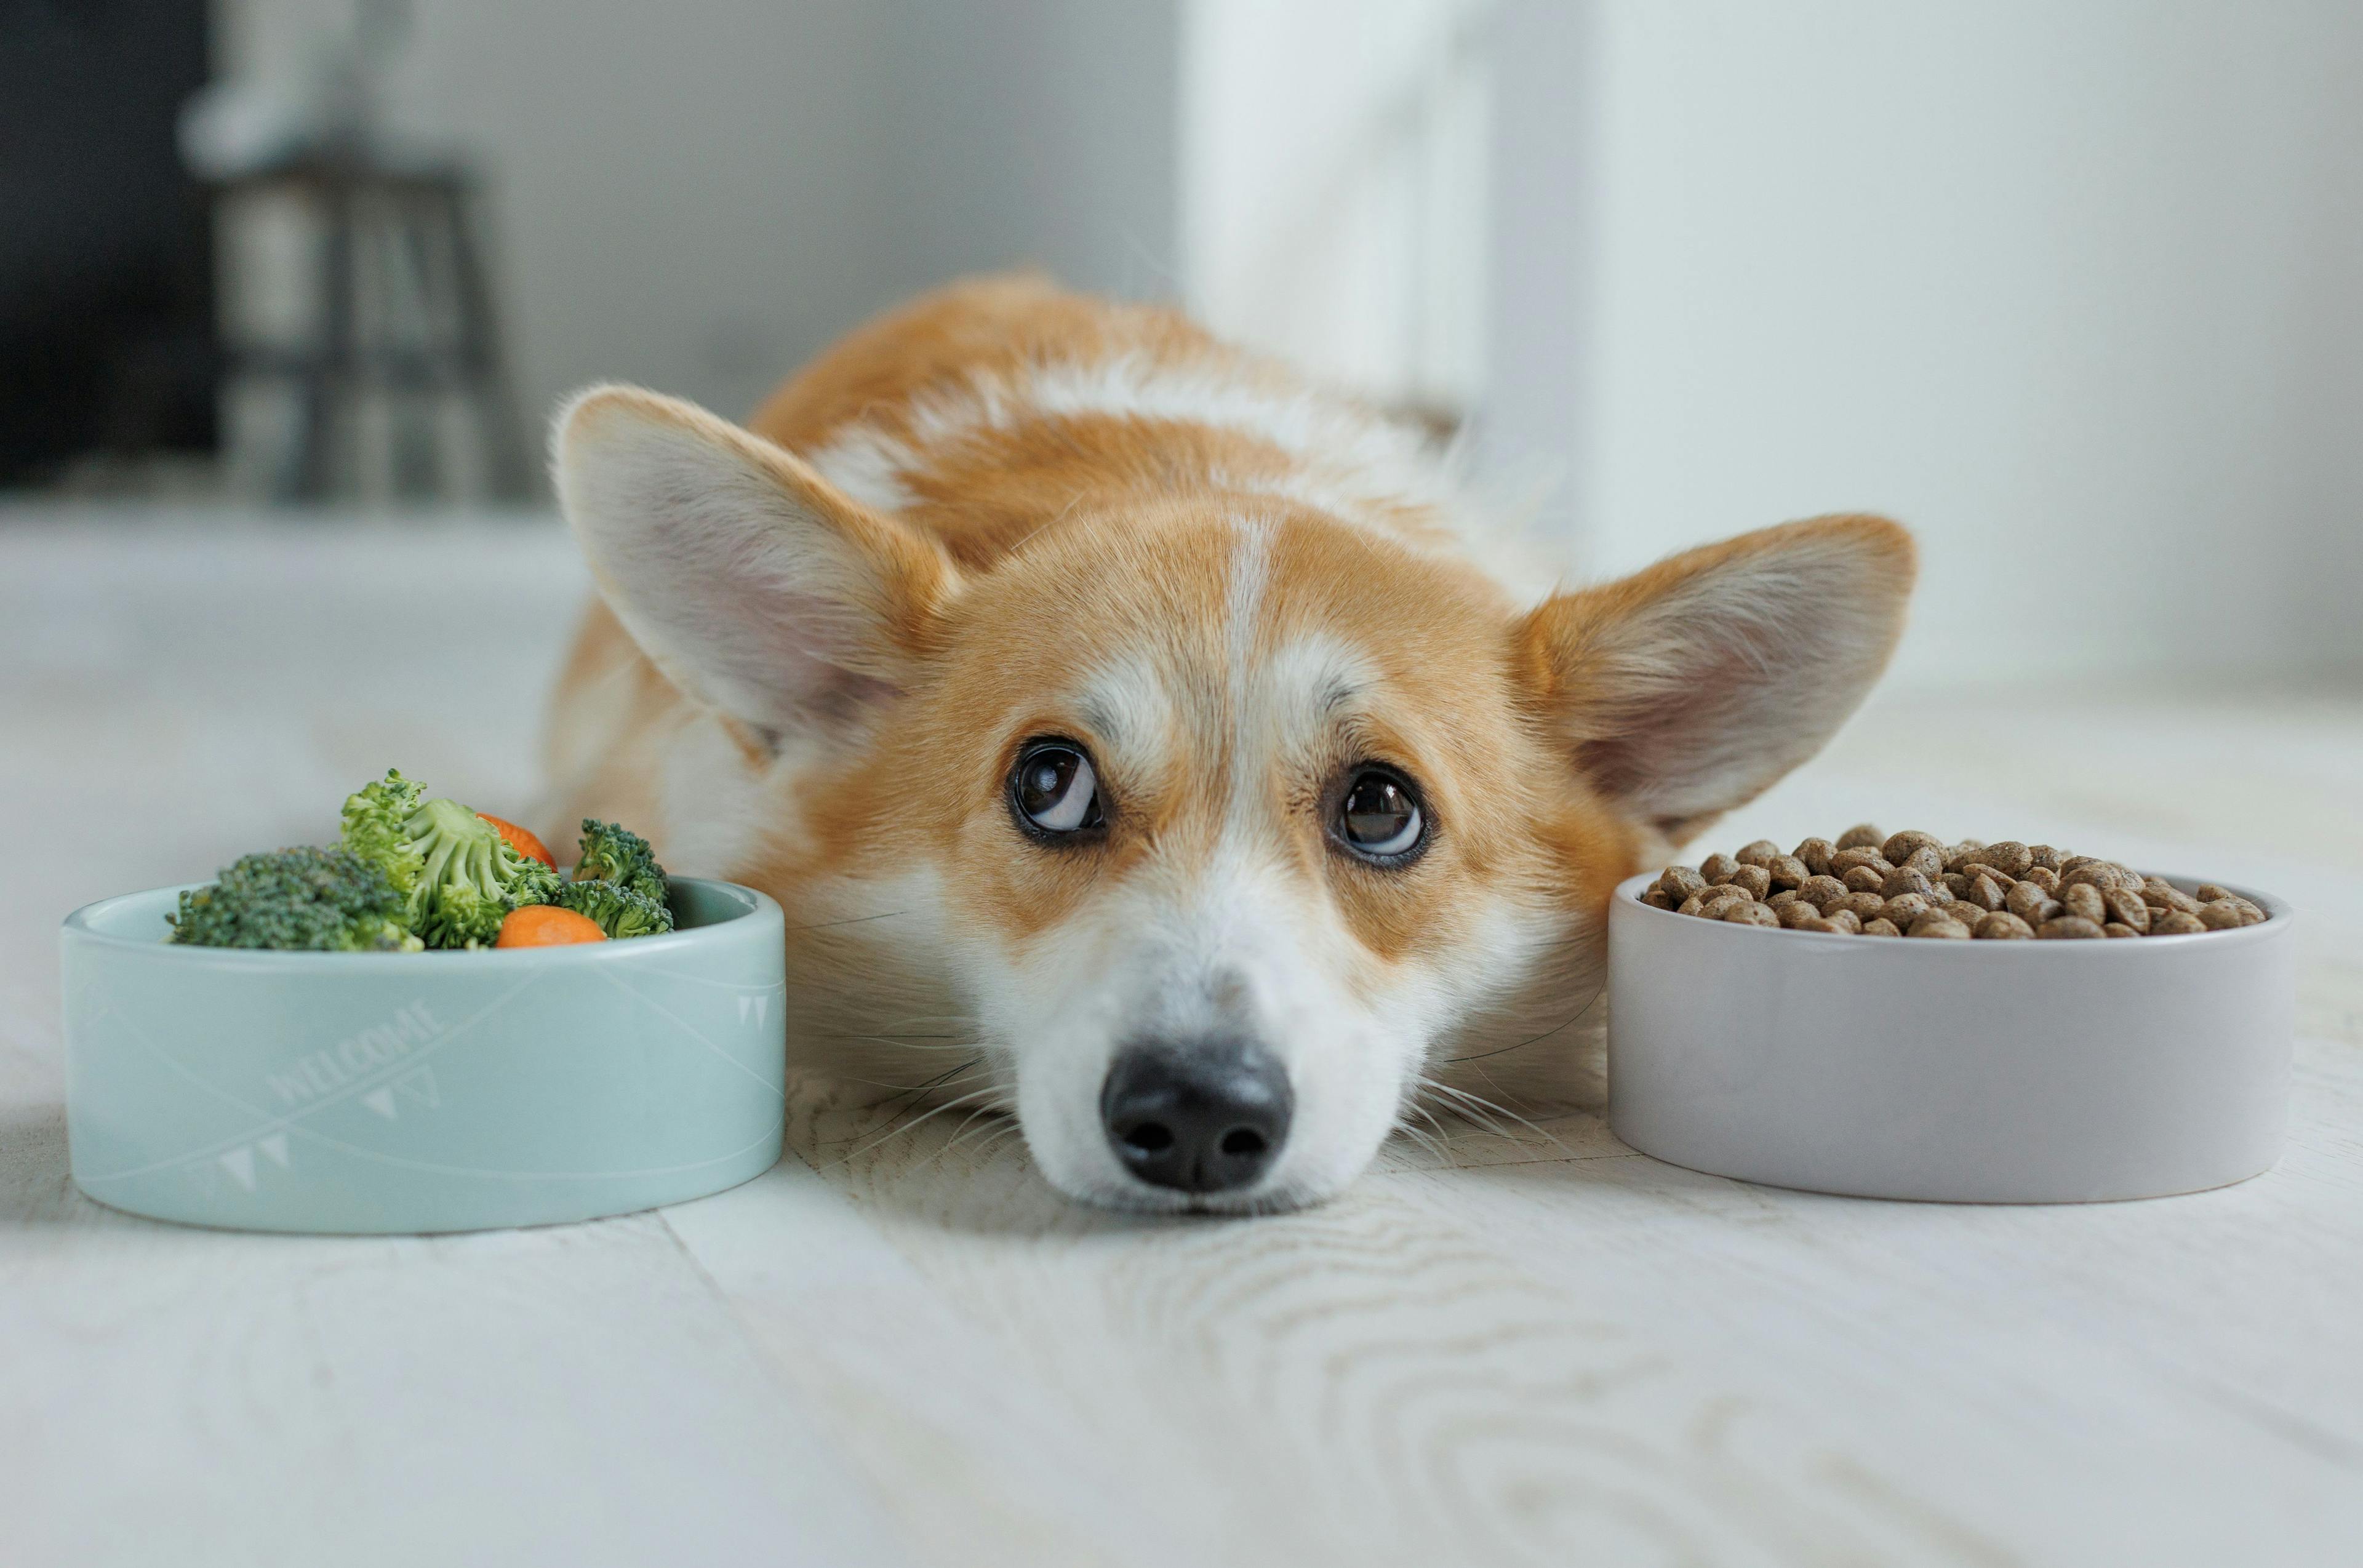 Dogs can have healthy outcomes with plant-based diets, studies reveal